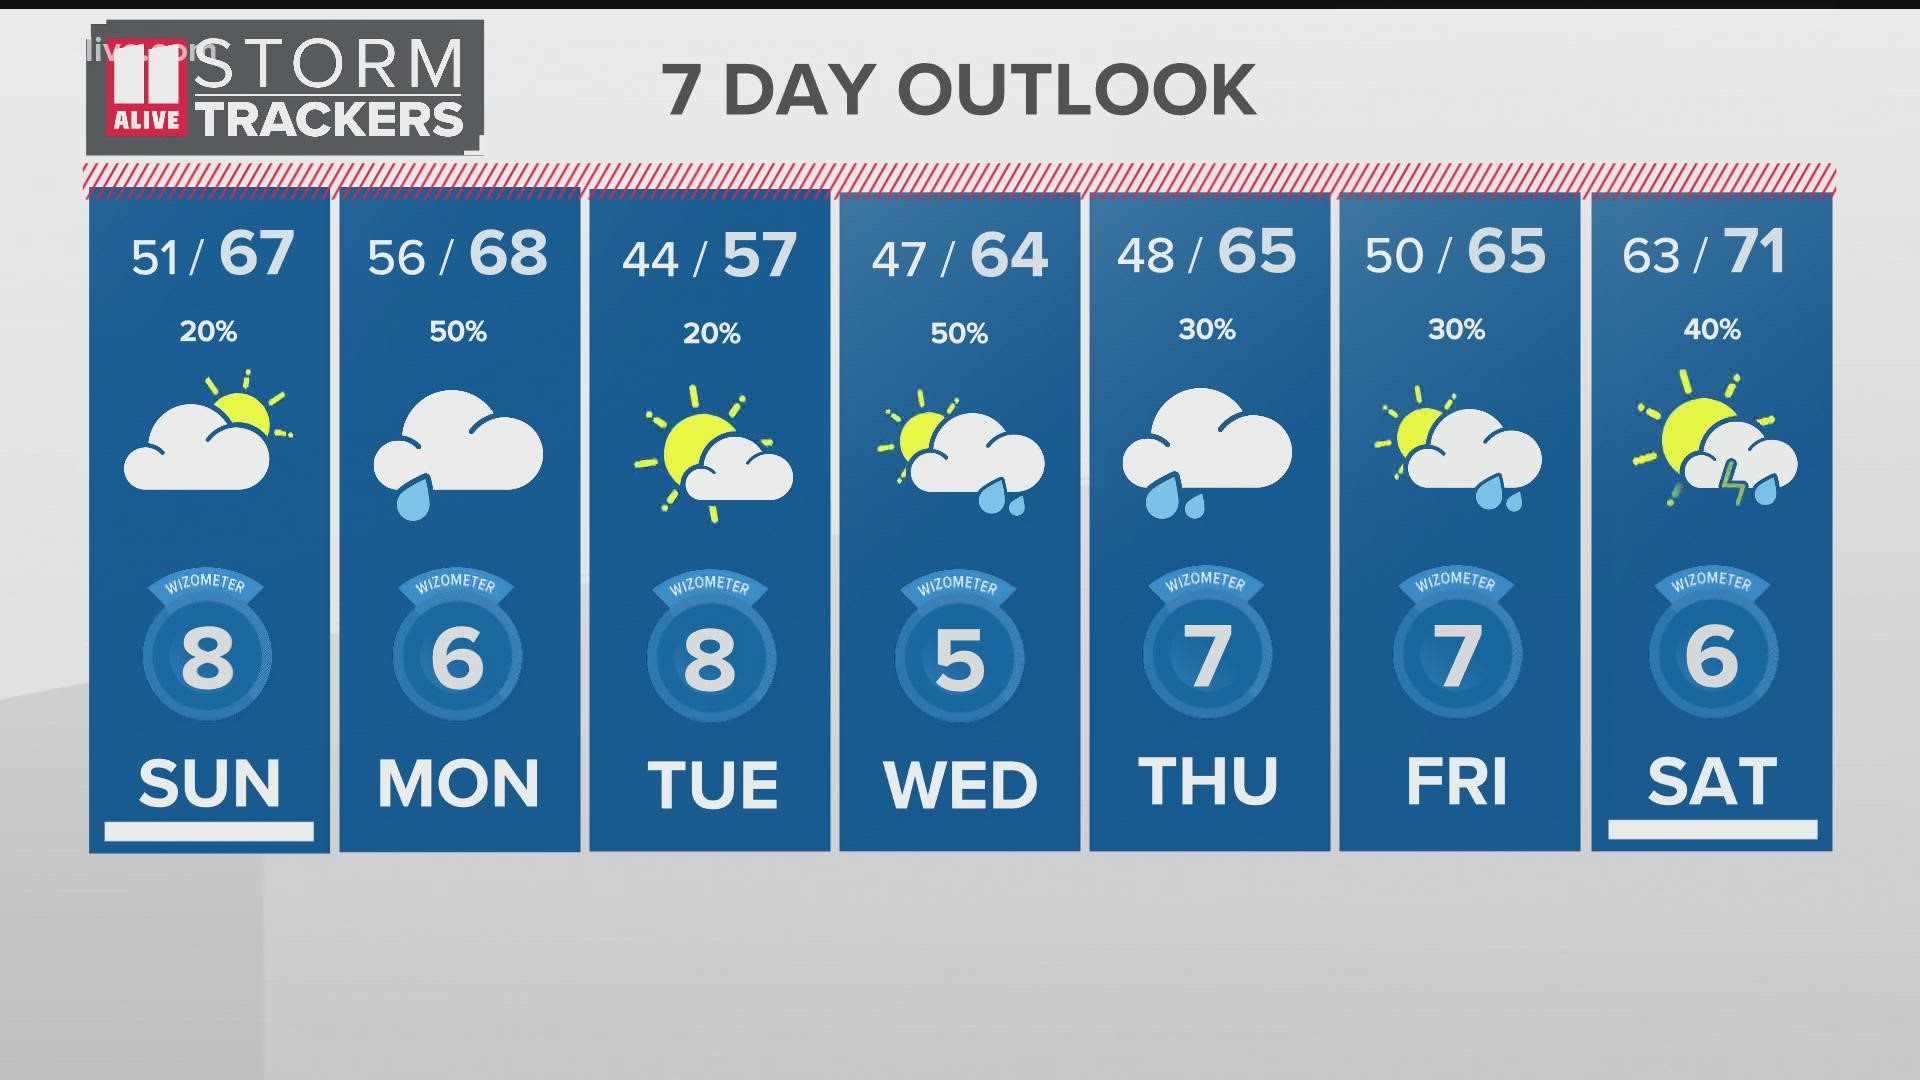 Next week will be more active with rain chances each day